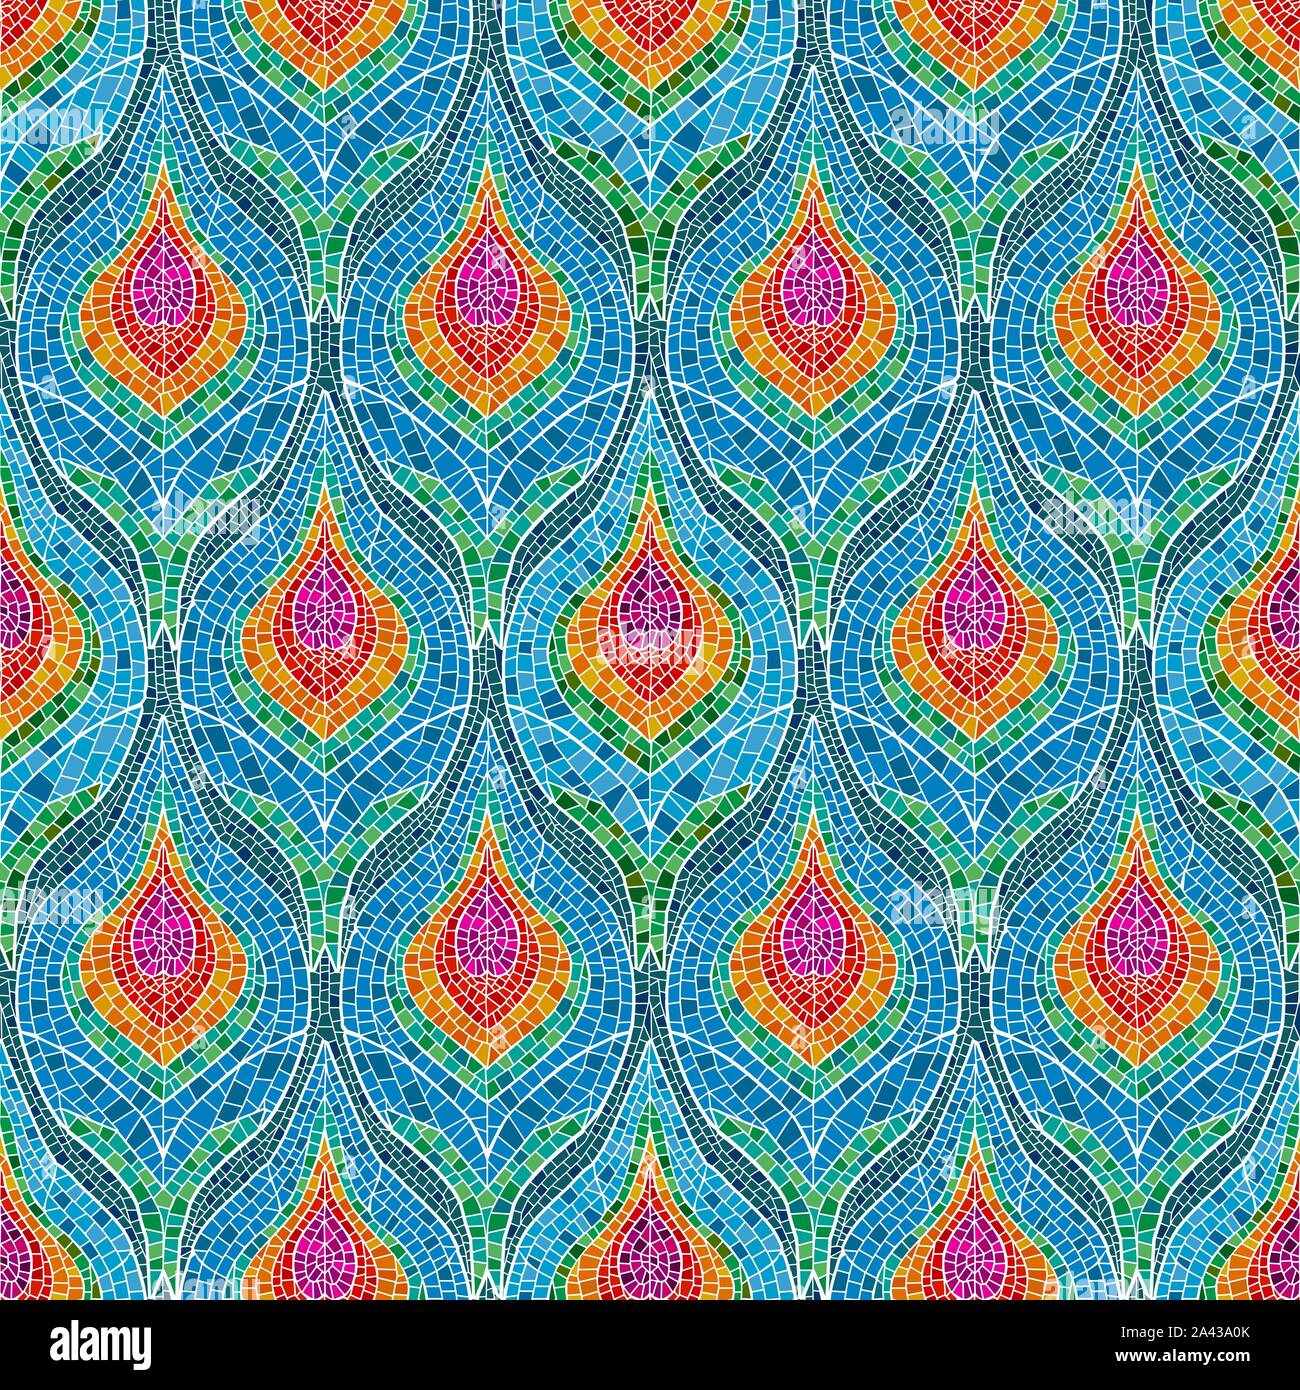 Mosaic tiles peacock feathers pattern, vector illustration Stock Vector